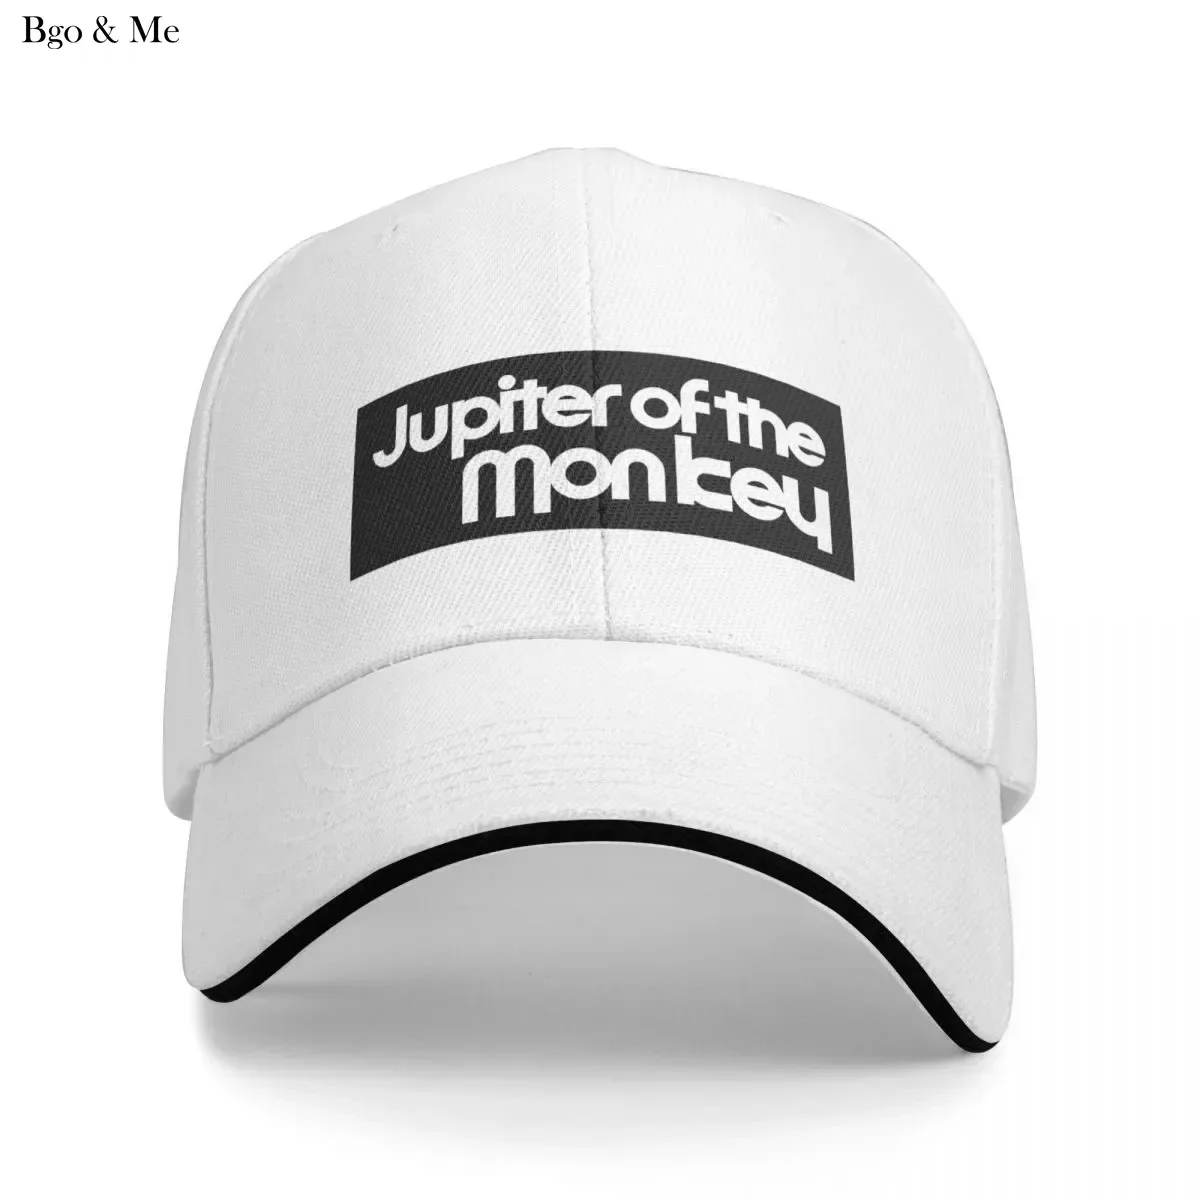 

2023 New The World Ends with You Jupiter of The Monkey Rindo Baseball Cap Rave New in The Hat Vintage Funny Hat